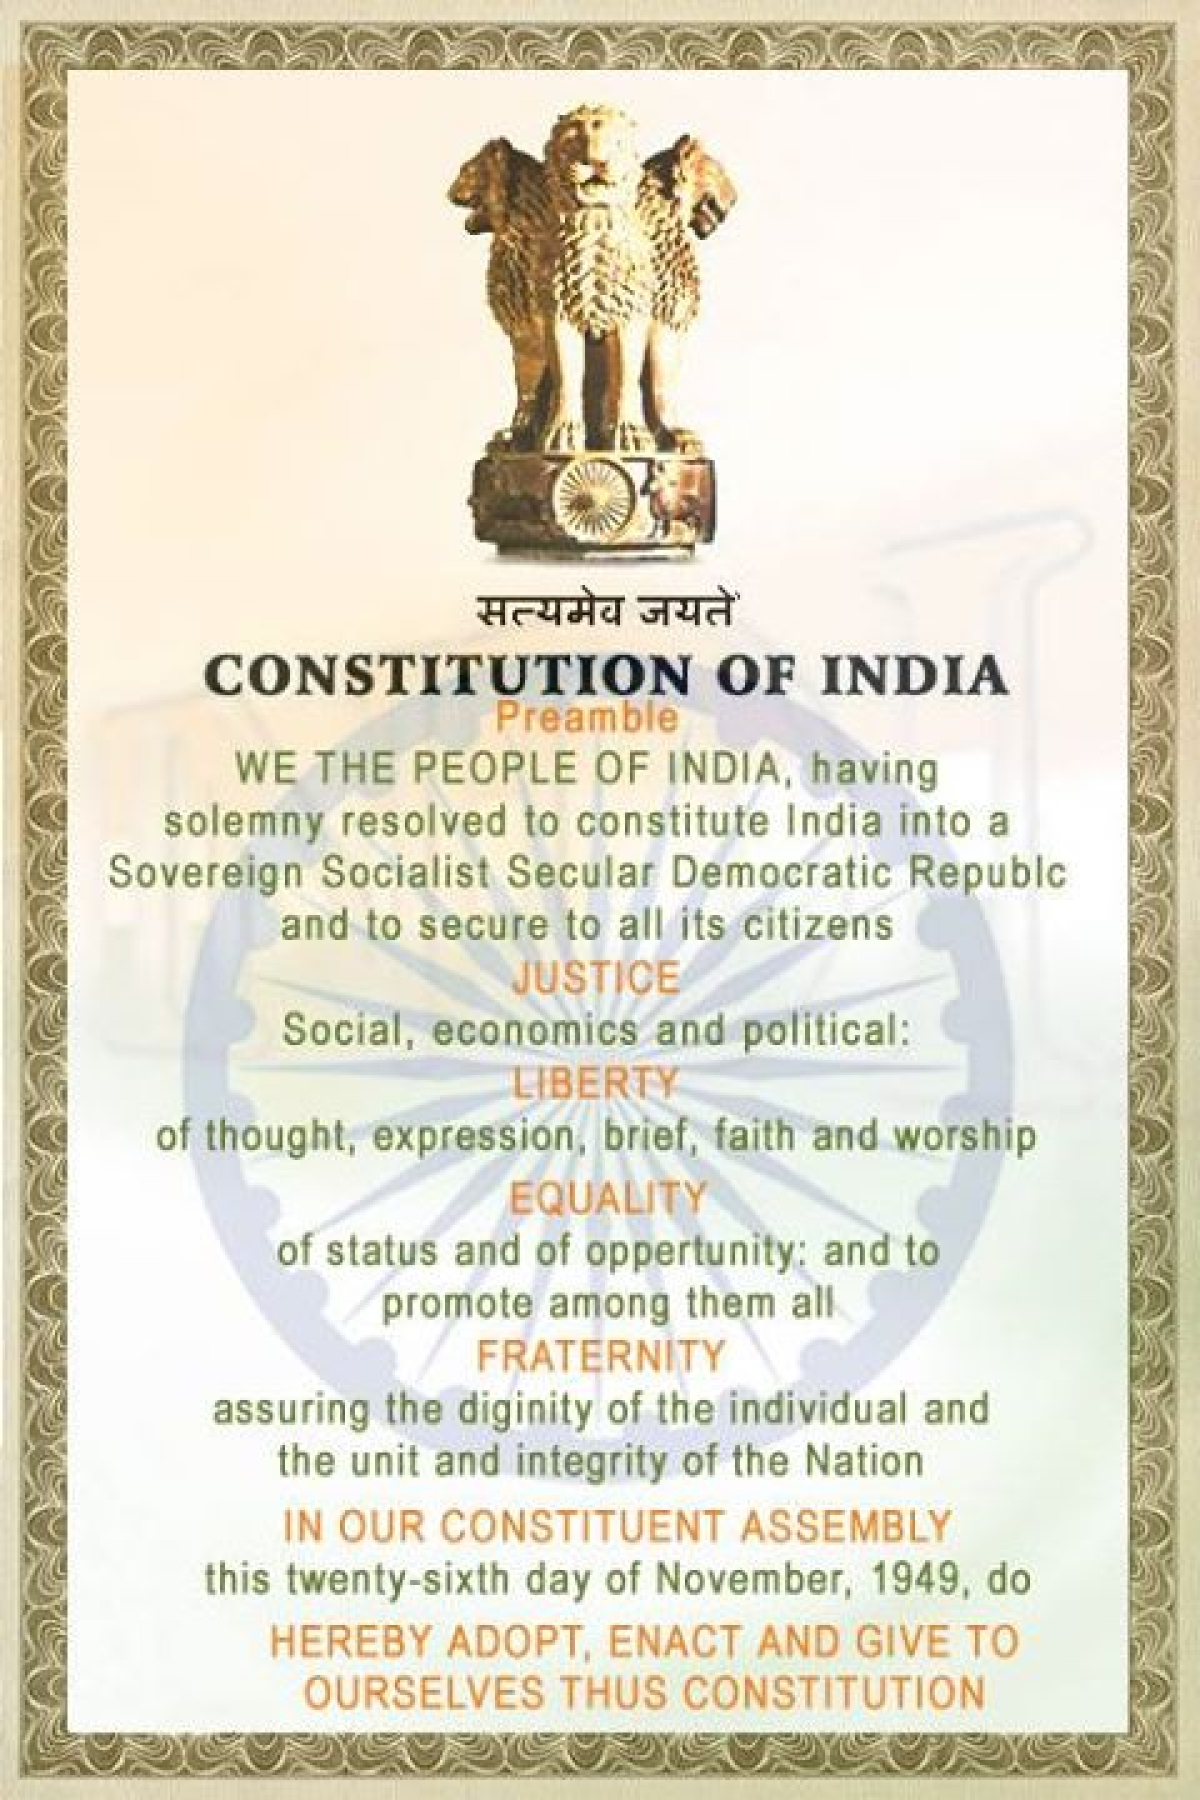 Articles of Indian Constitution » Article 1 to 11 of indian constitution